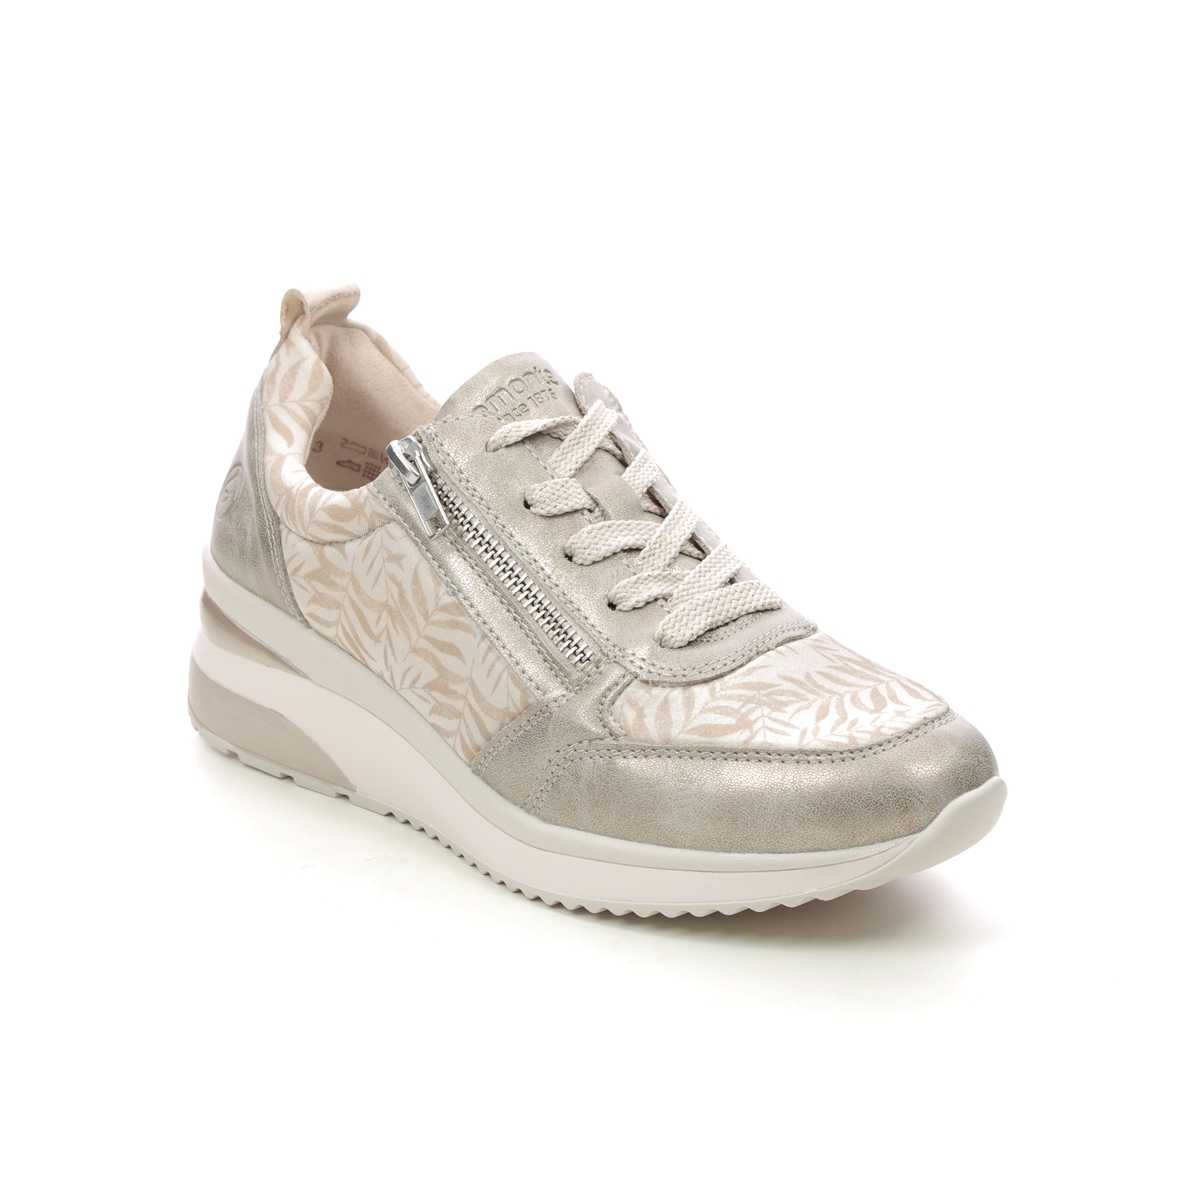 Remonte D2401-60 Rea Zip Wedge Light Gold Womens trainers in a Plain  in Size 40